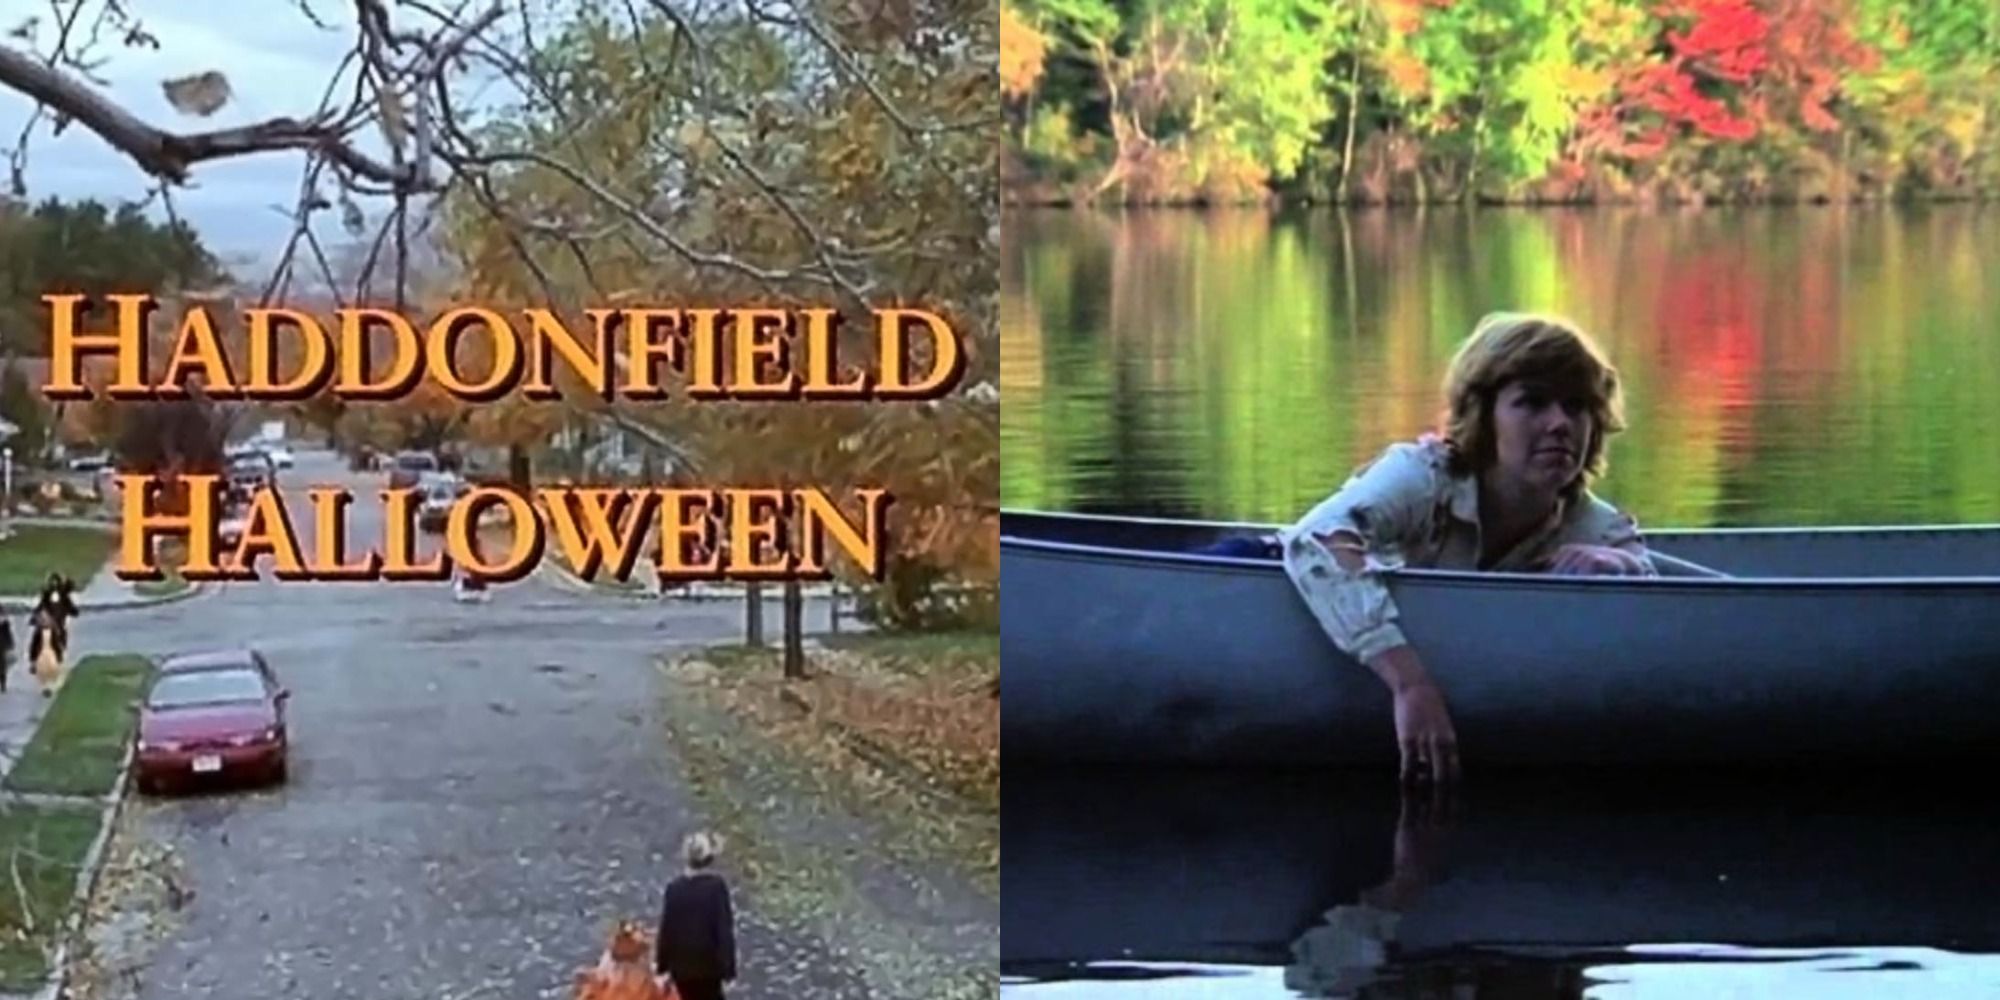 Camp Crystal Lake Other Iconic Horror Locations